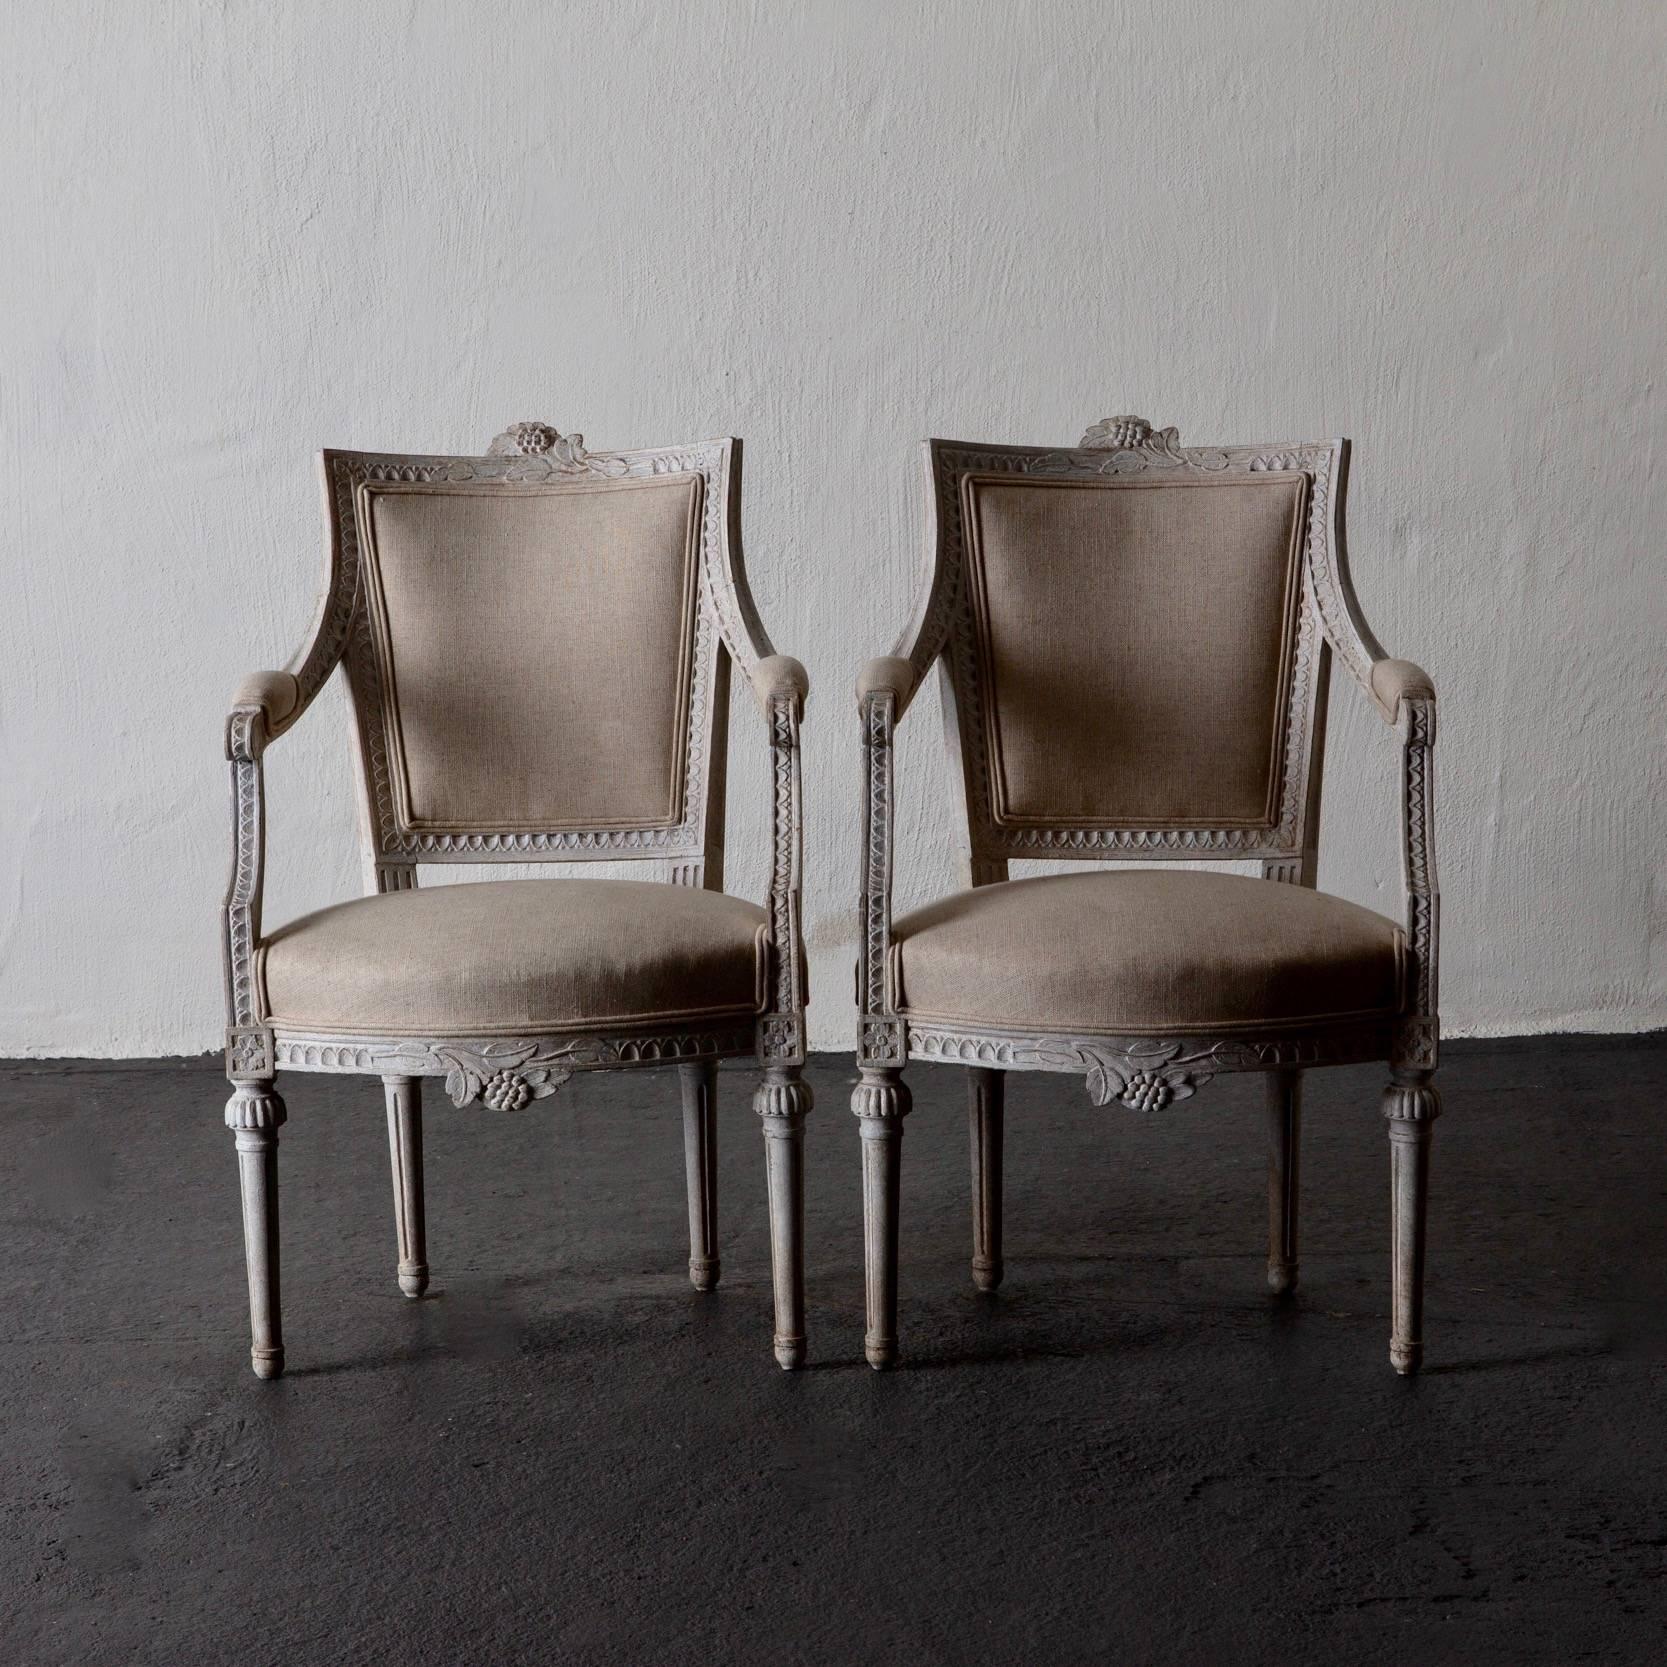 Armchairs pair of Gustavian 19th century Swedish white Sweden. A pair of armchairs made during the Gustavian period in Sweden. Frame in white washed finished with nail tip carvings and flowers. Legs are rounded and channelled. Seat, back and